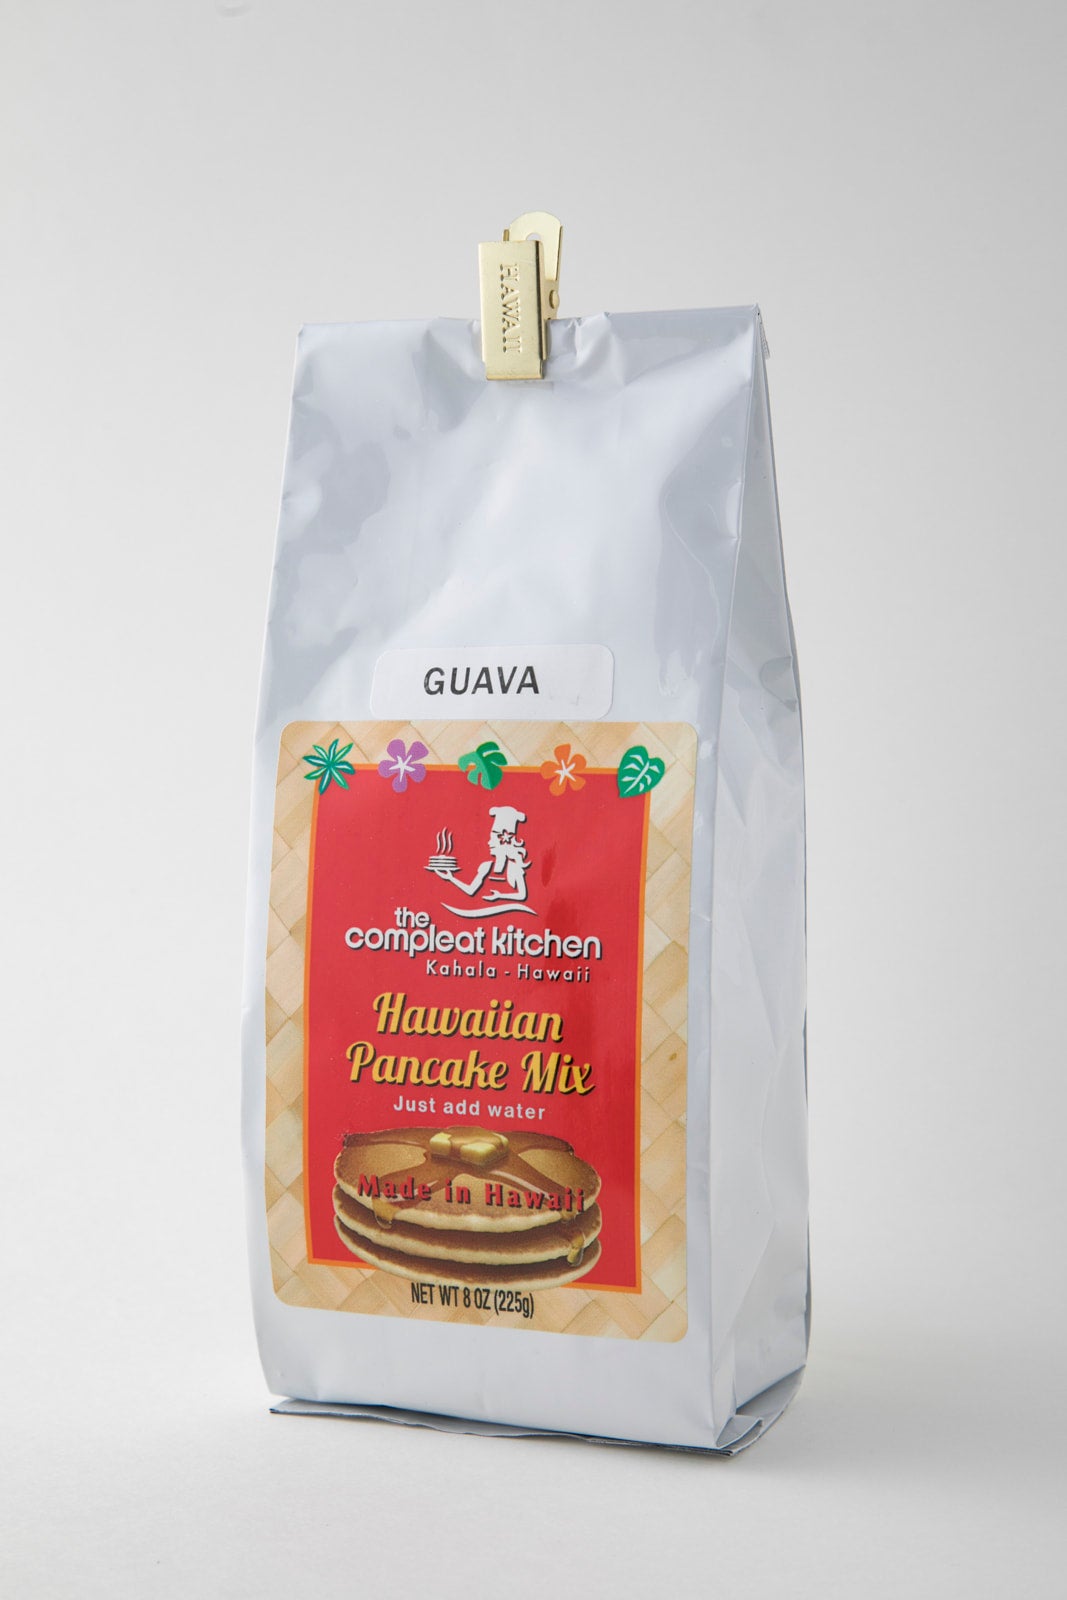 The Compleat Kitchen Original Pancake Mix - 8 oz. (7 flavors) - Made in Hawai'i